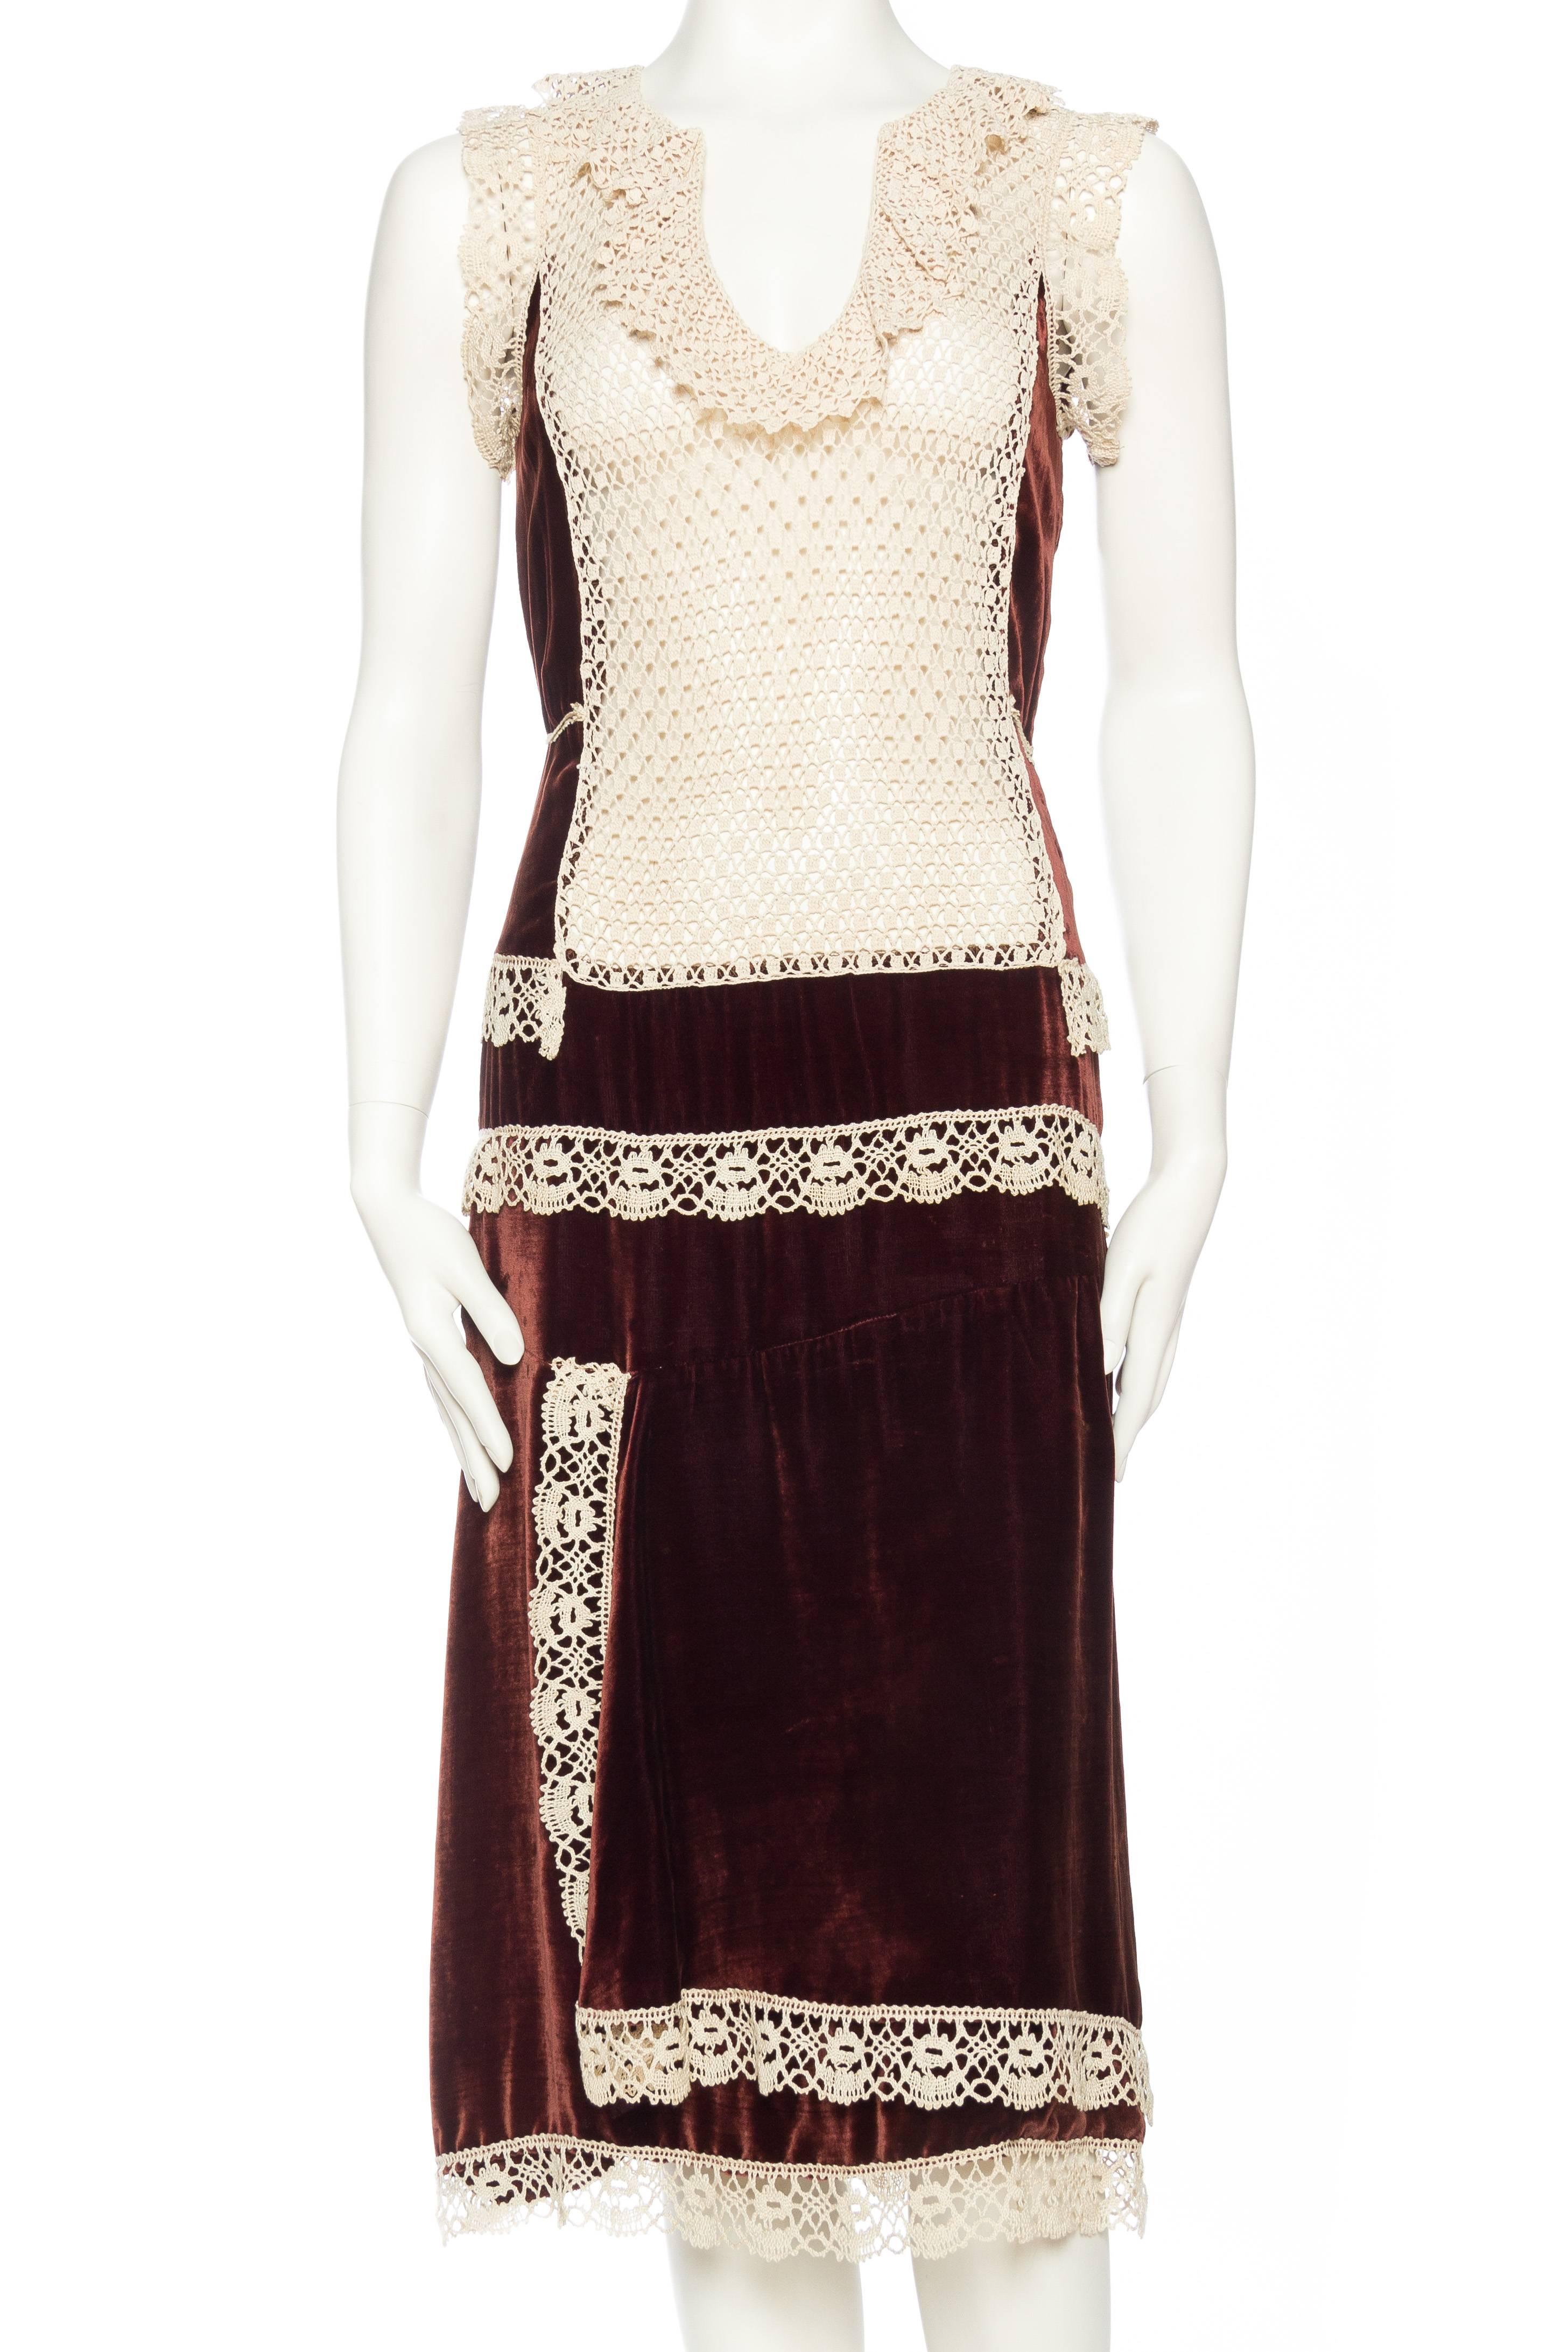 A flattering and fun design from the 1920s of lace and velvet. Lace is sheer down the front so a slip is suggested. 